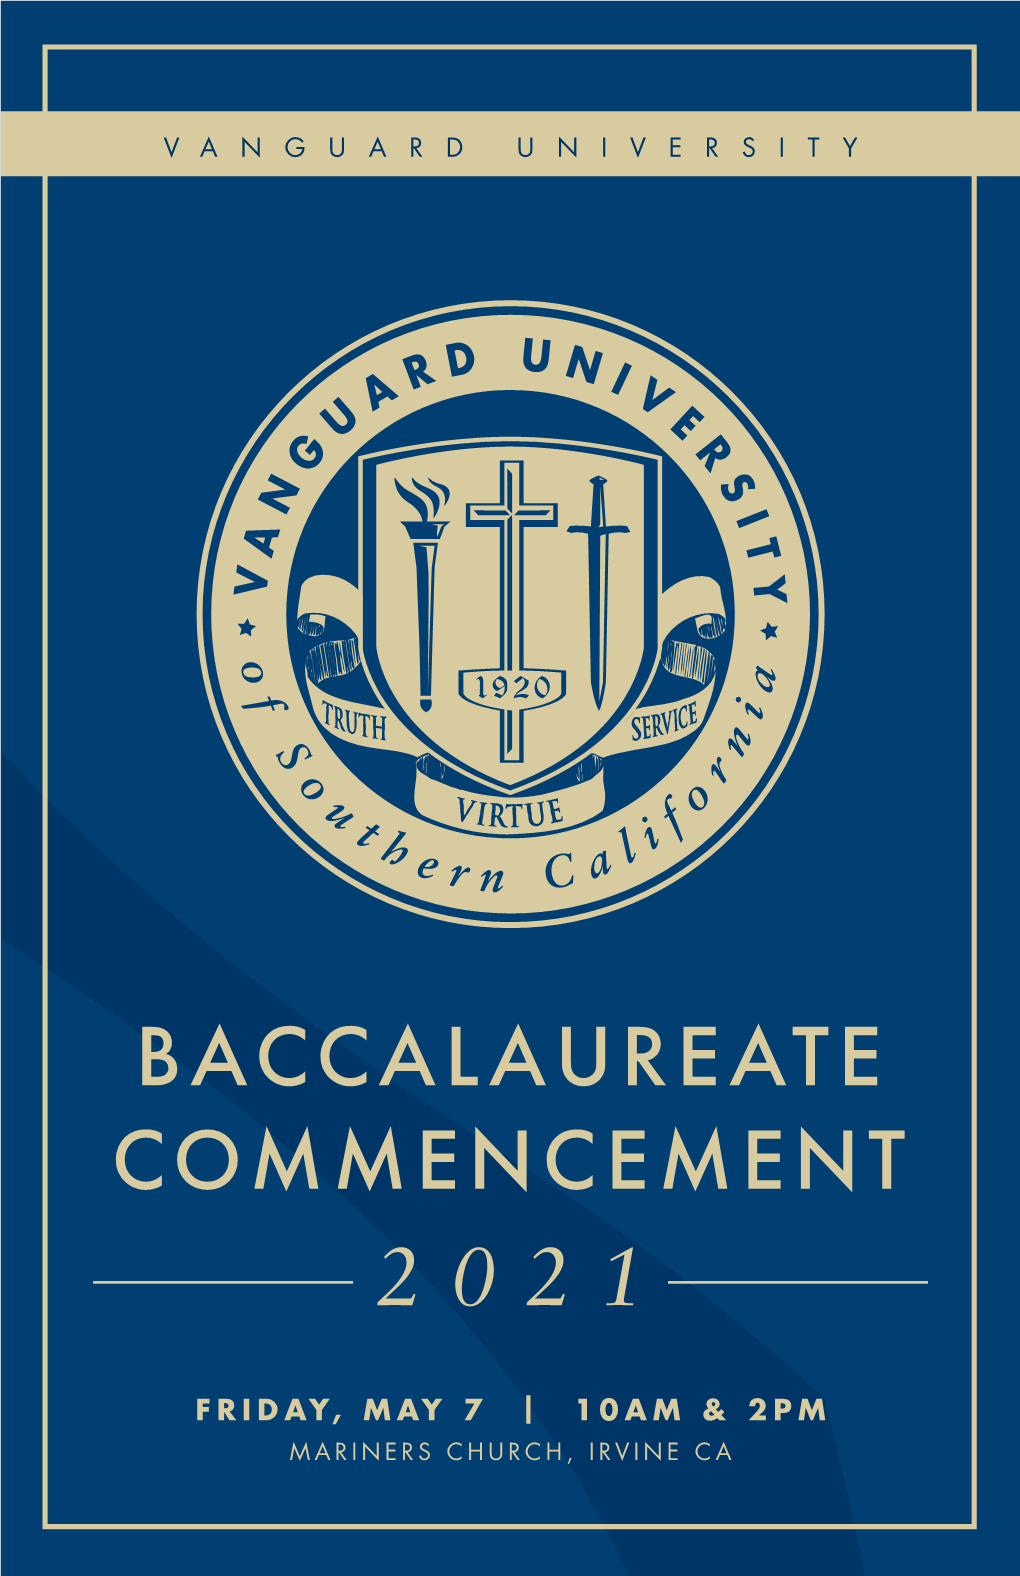 Baccalaureate Commencement 2021